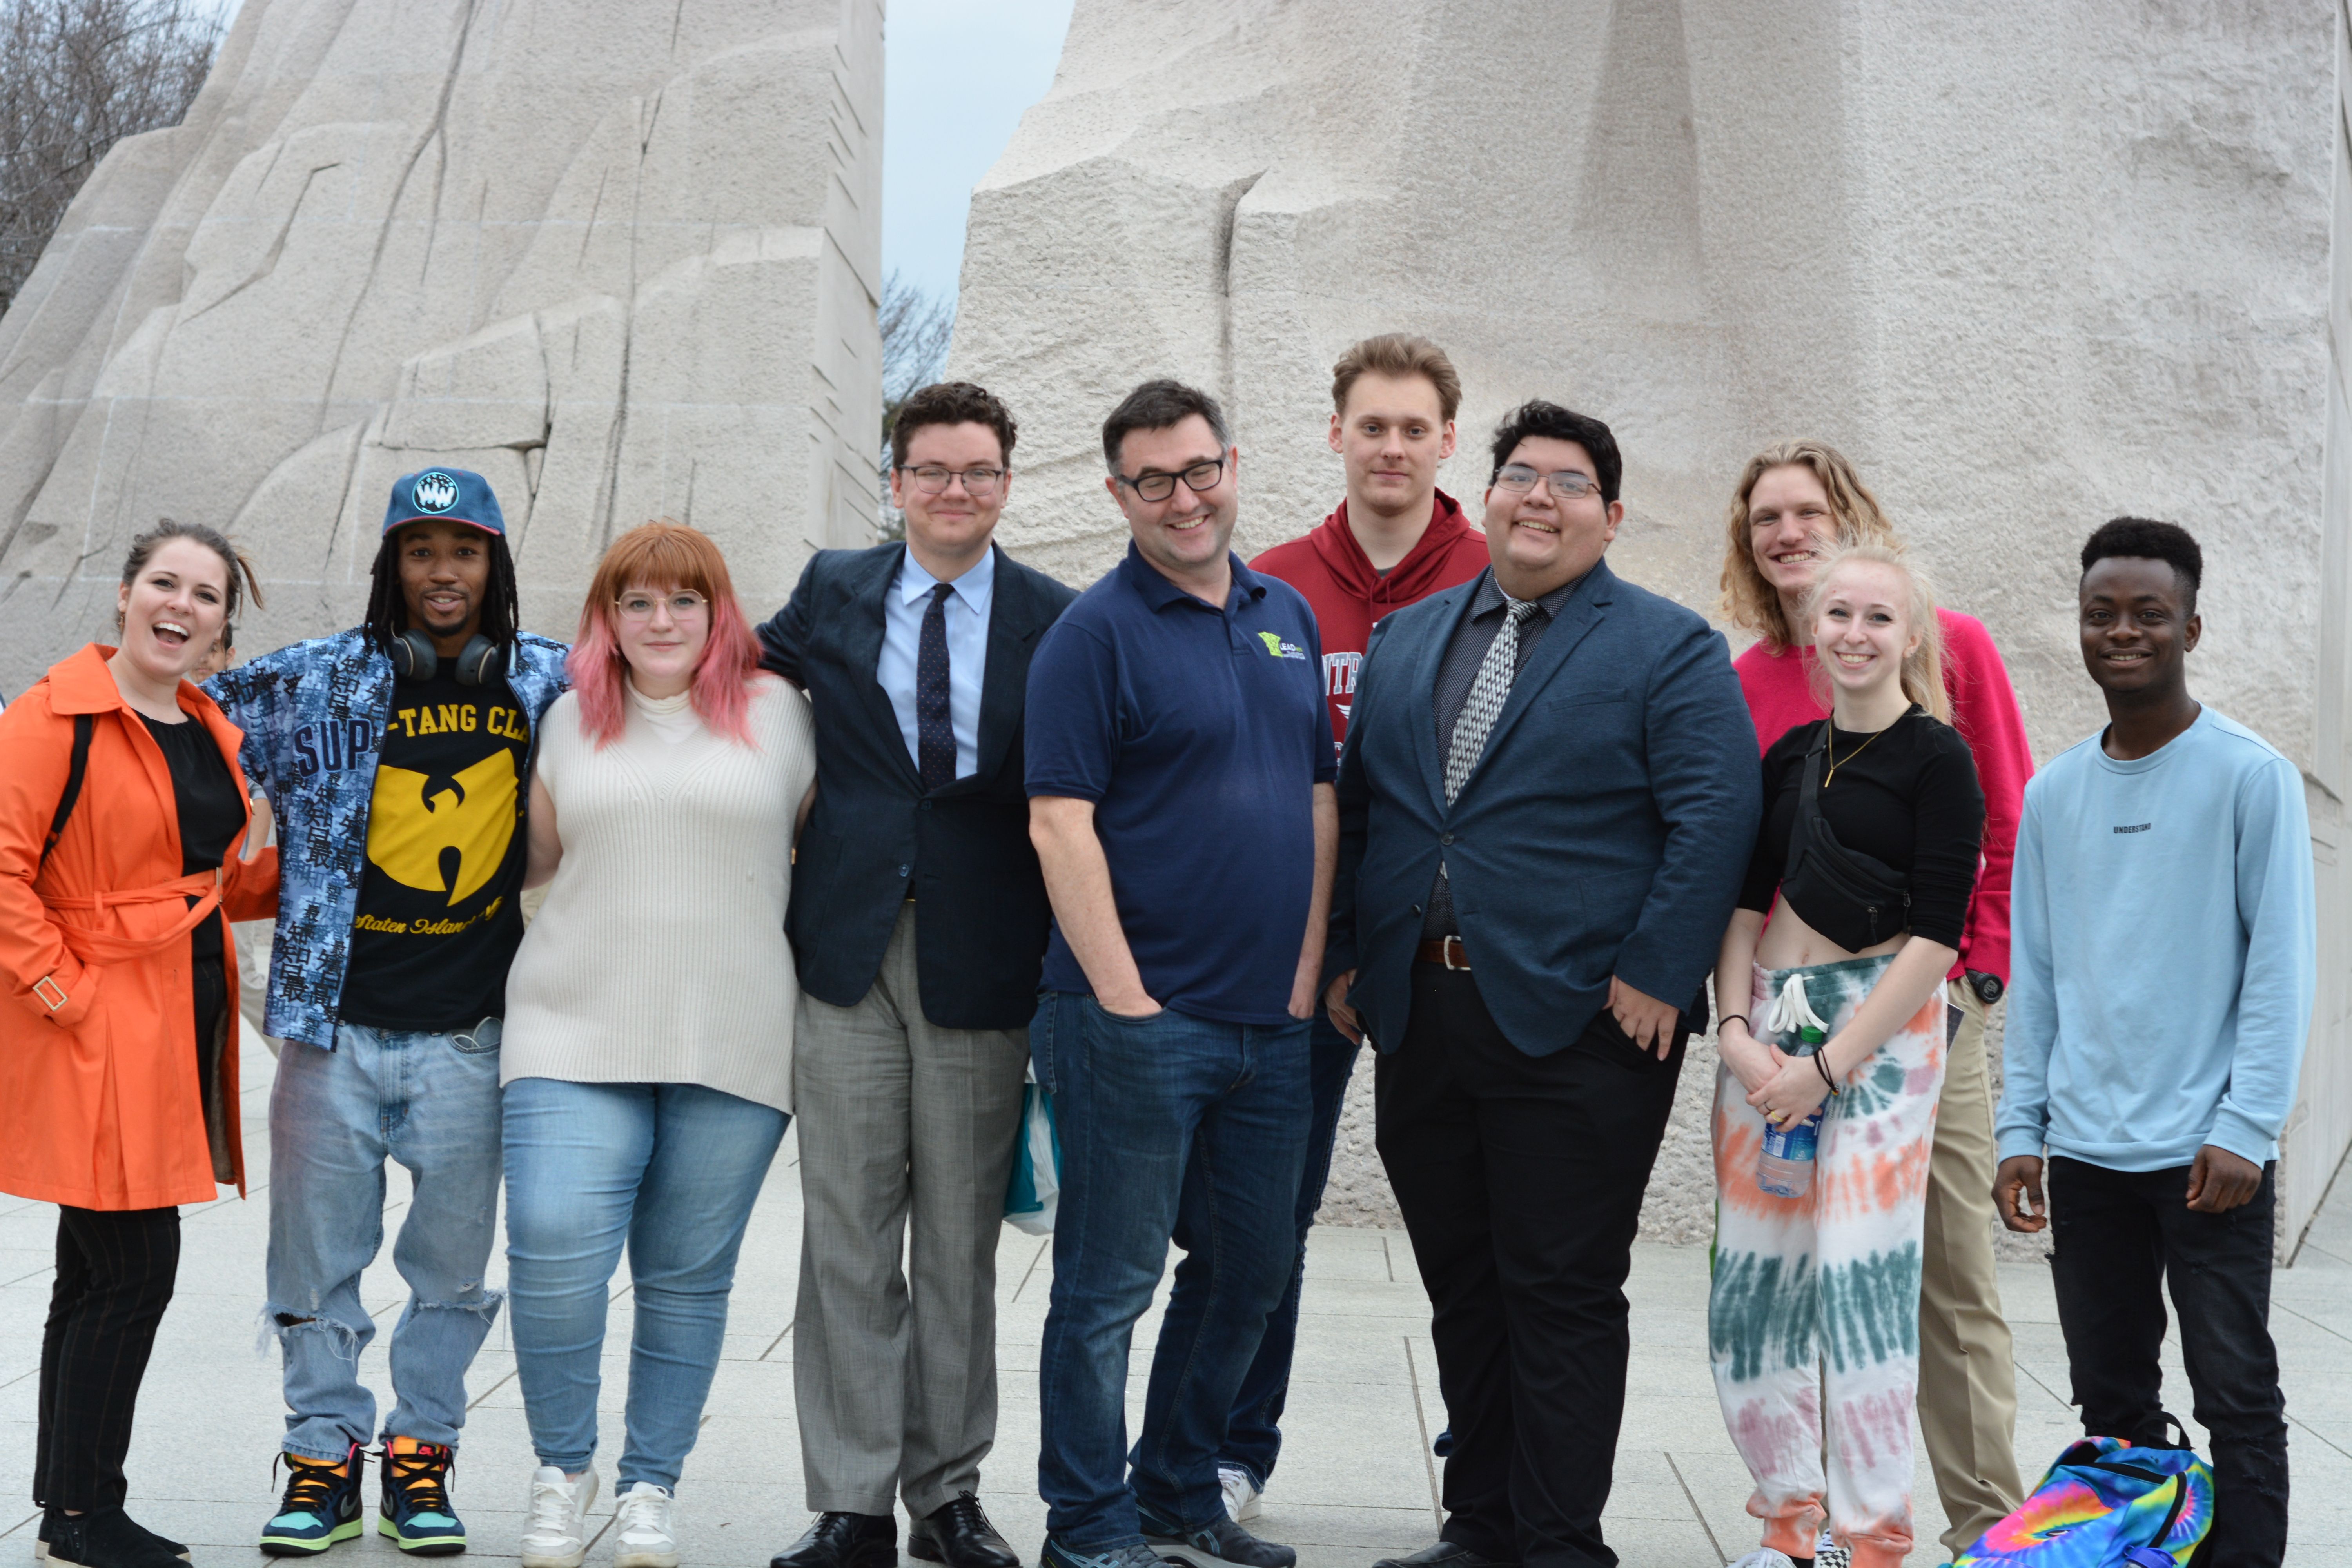 group of students at the Martin Luther King Jr memorial in Washington D.C.